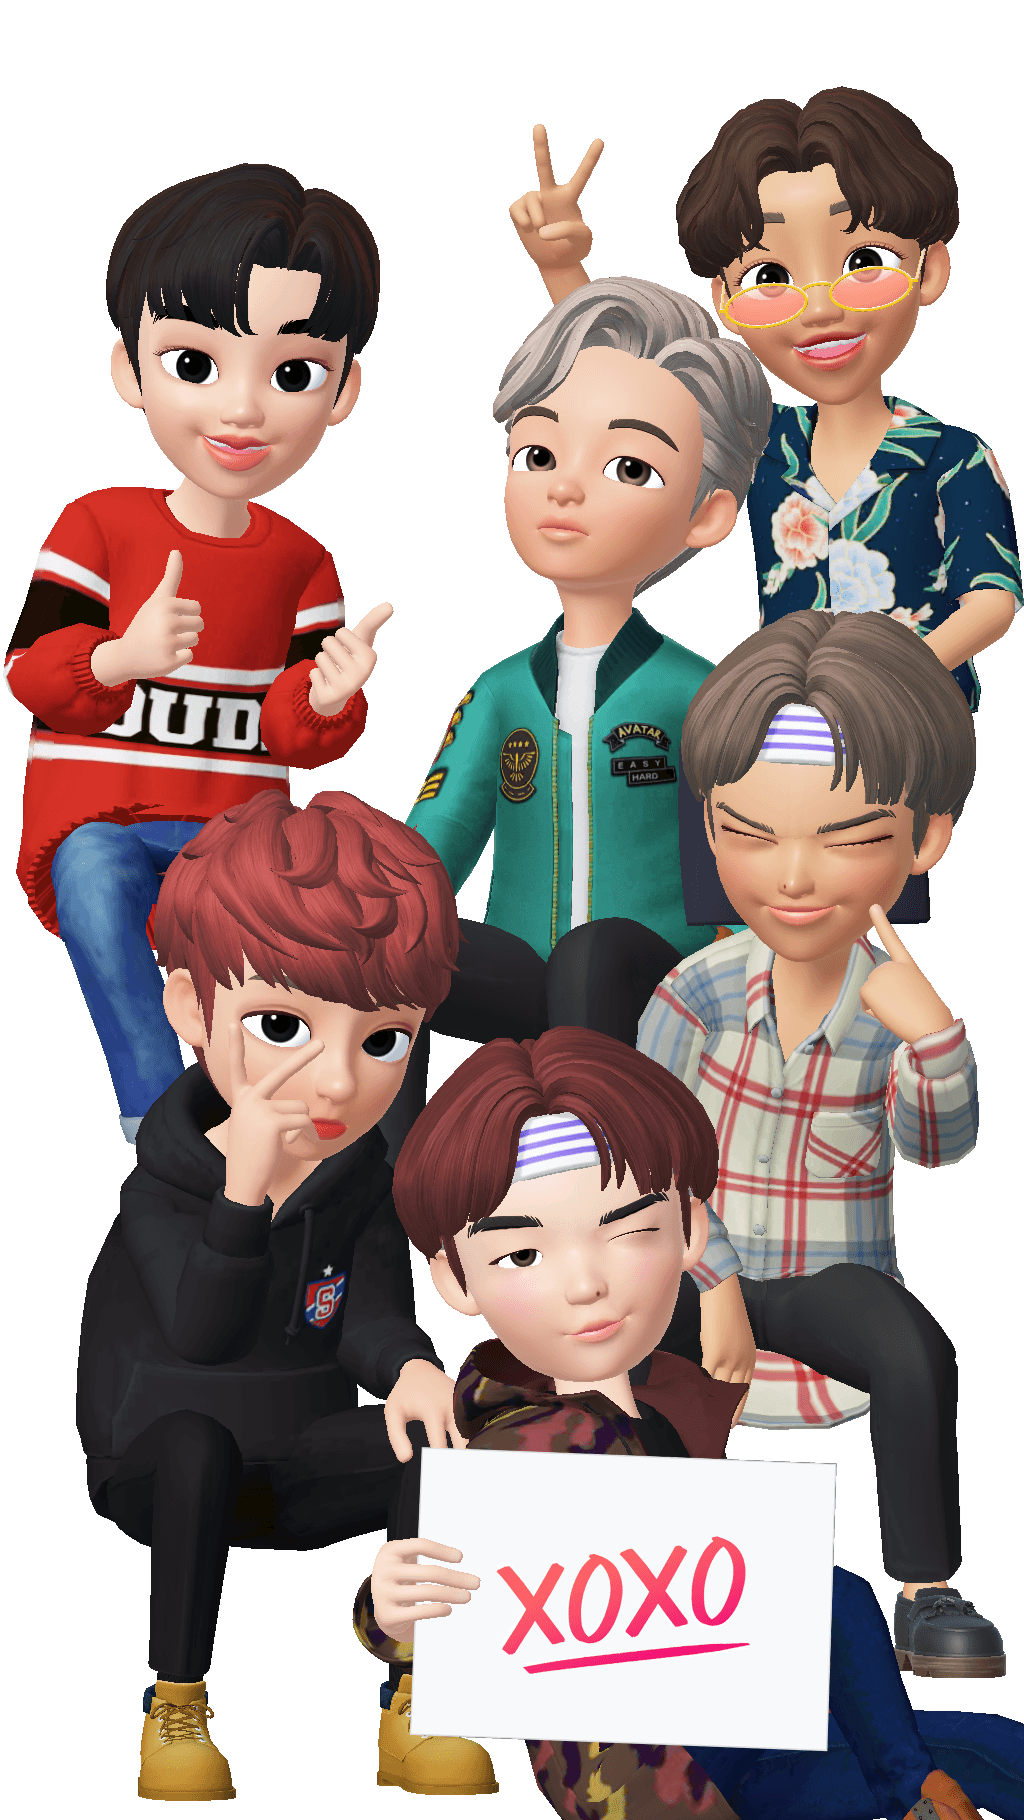 zepeto wallpapers wallpaper cave on zepeto wallpapers